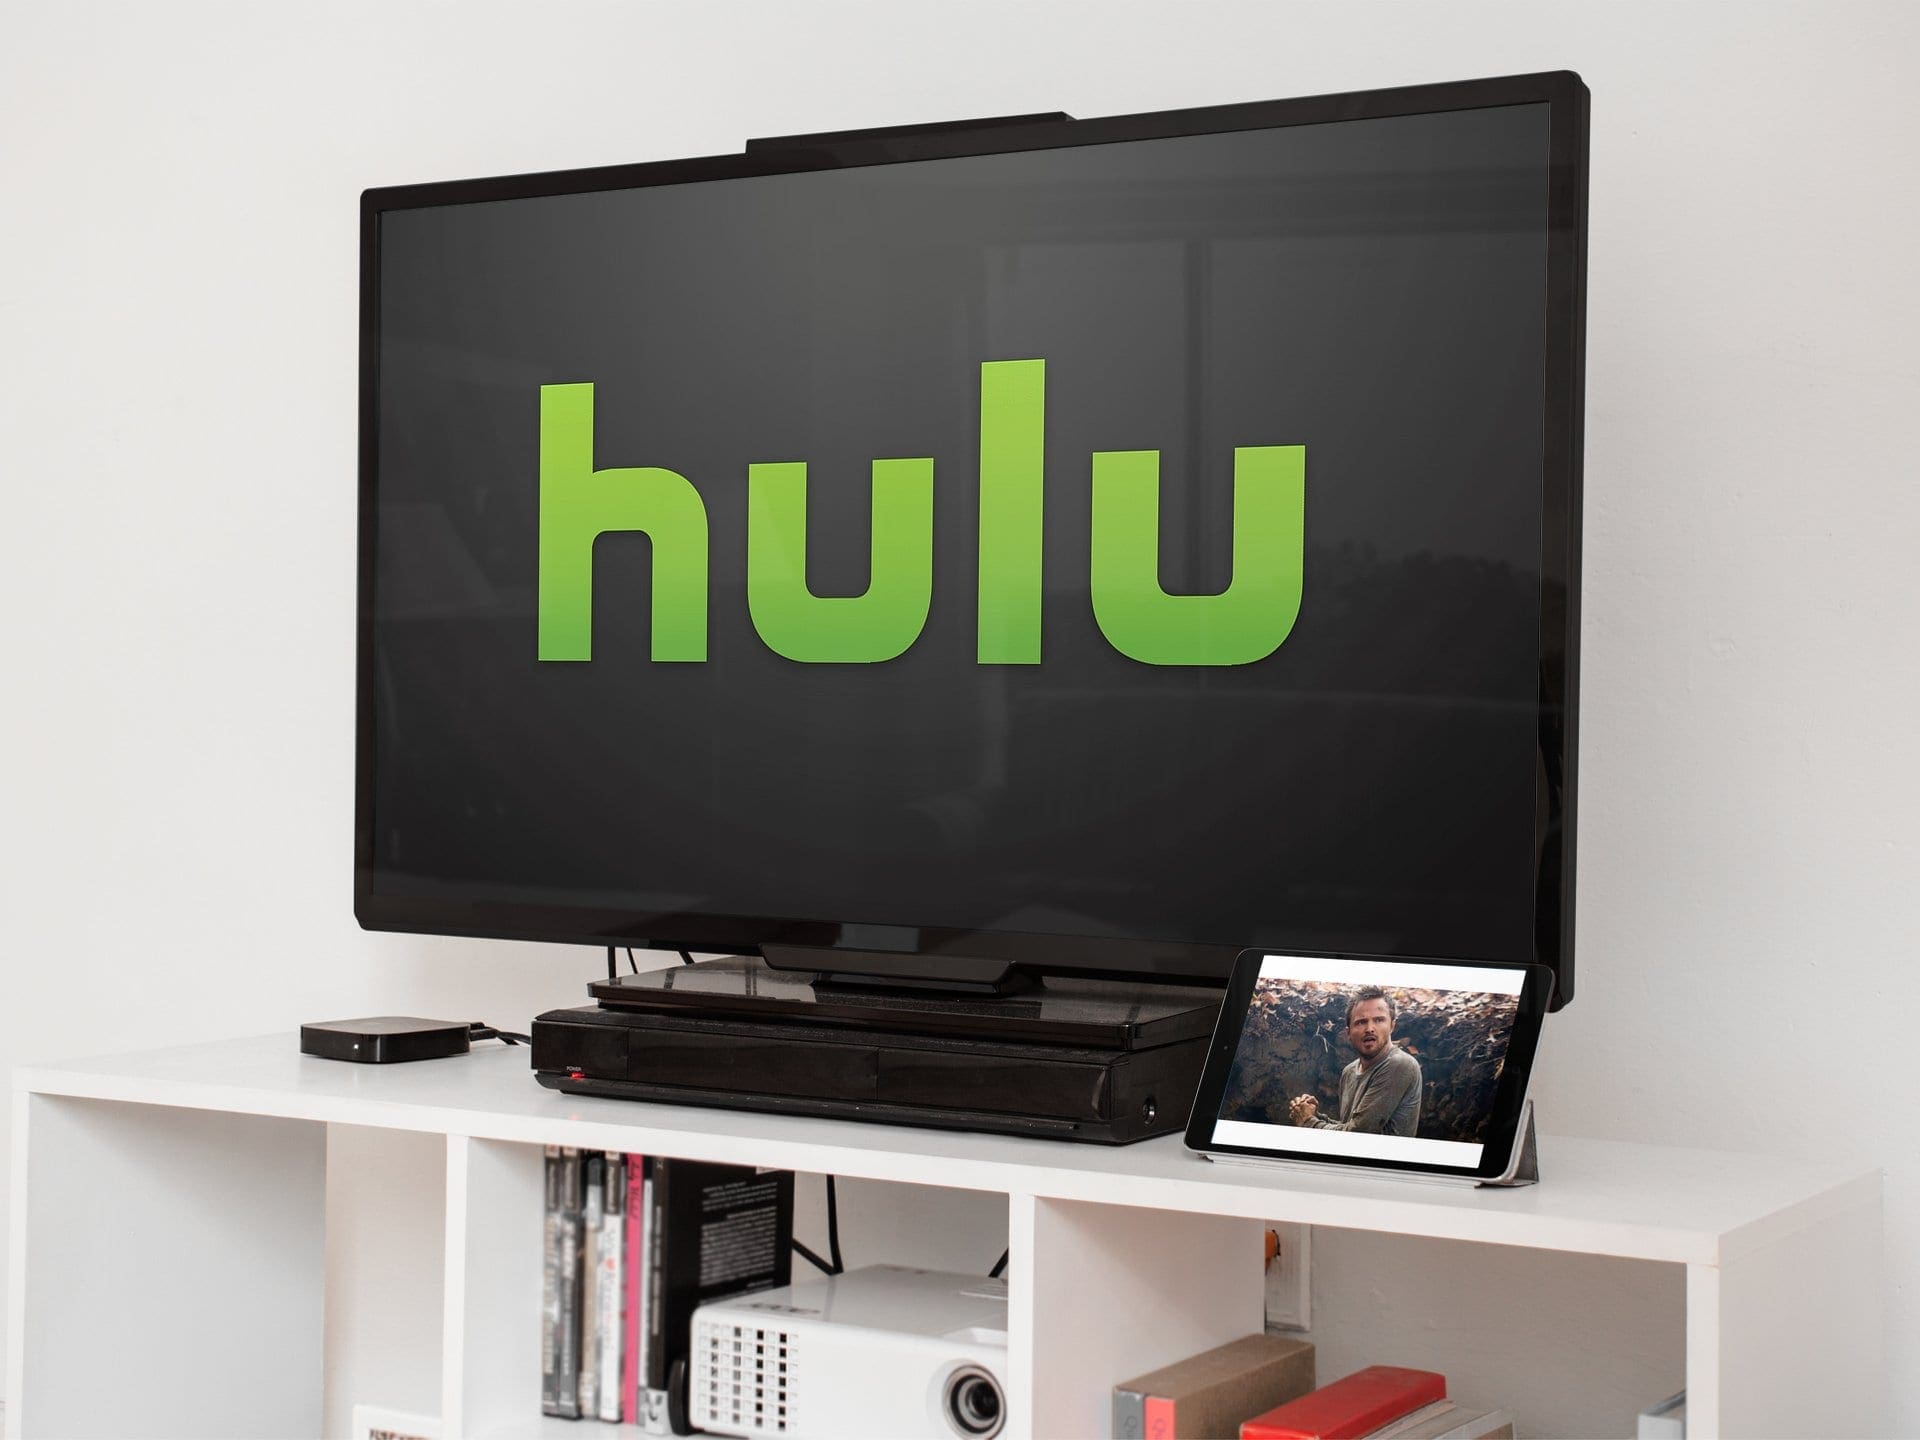 Hulu’s Android TV App Gets Mysterious 720p To 1080p Upgrade; Conditions